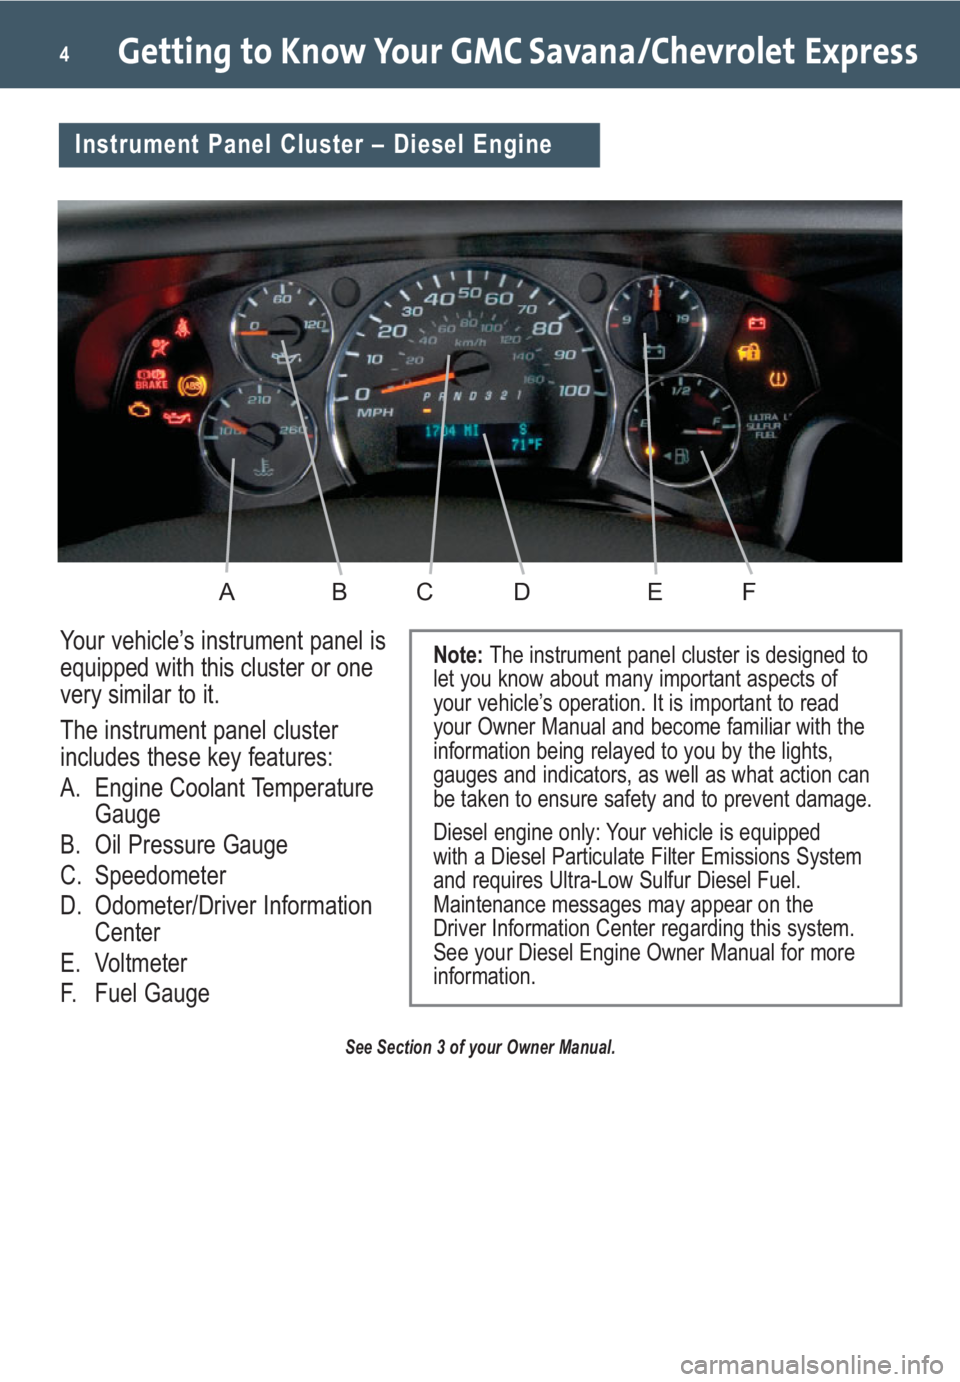 GMC SAVANA 2008  Get To Know Guide Your vehicle’s instrument panel is
equipped with this cluster or one
very similar to it.
The instrument panel cluster
includes these key features:
A. Engine Coolant Temperature
Gauge
B. Oil Pressure